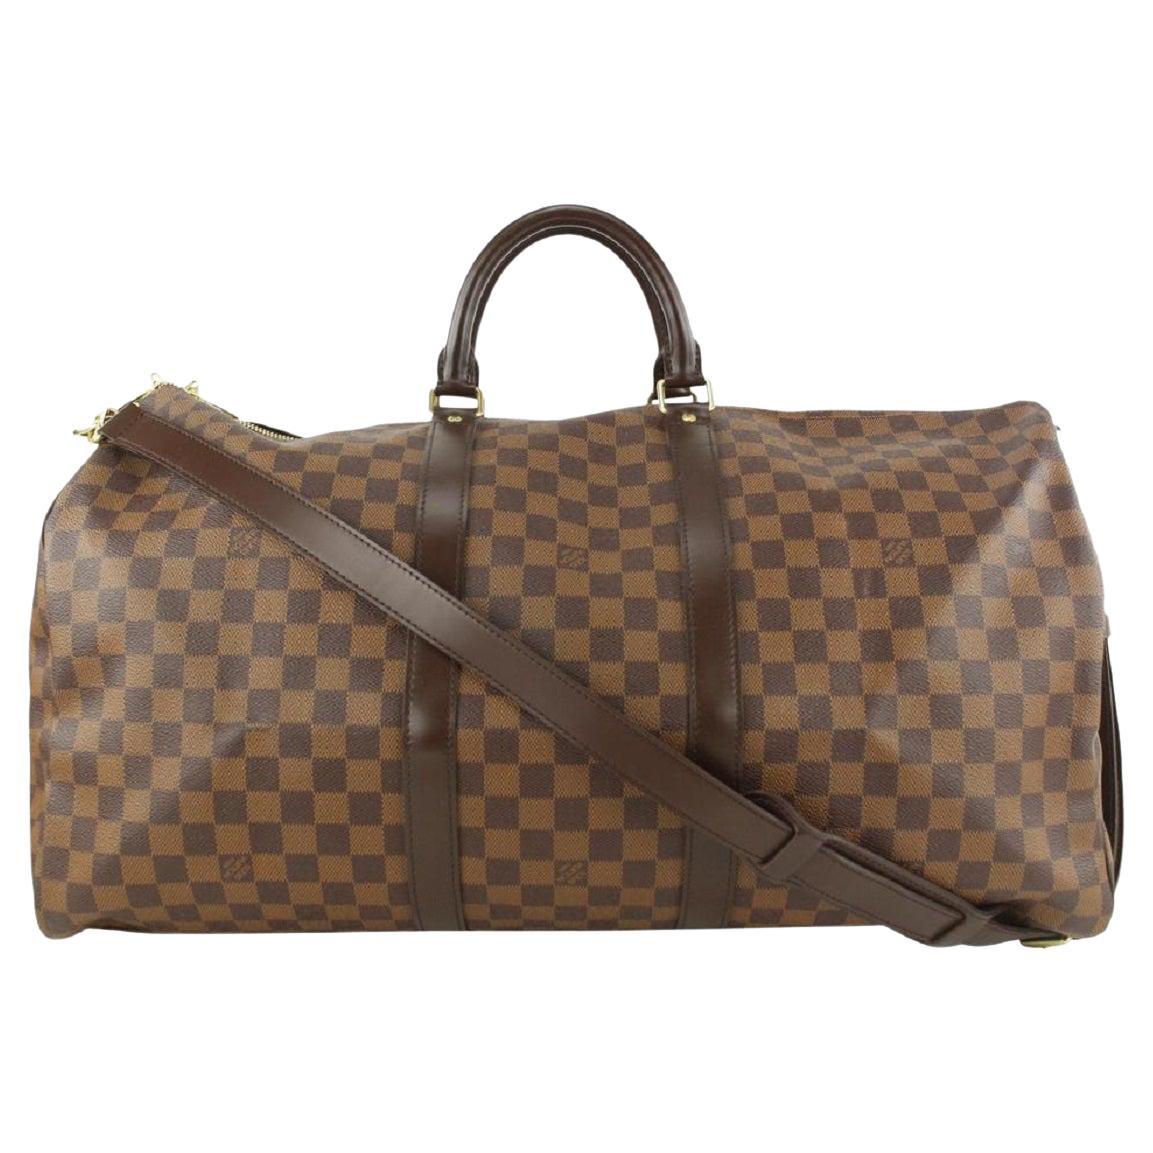 Louis Vuitton Damier Ebene Keepall Bandouliere 55 Duffle Bag with Strap 9lv62 